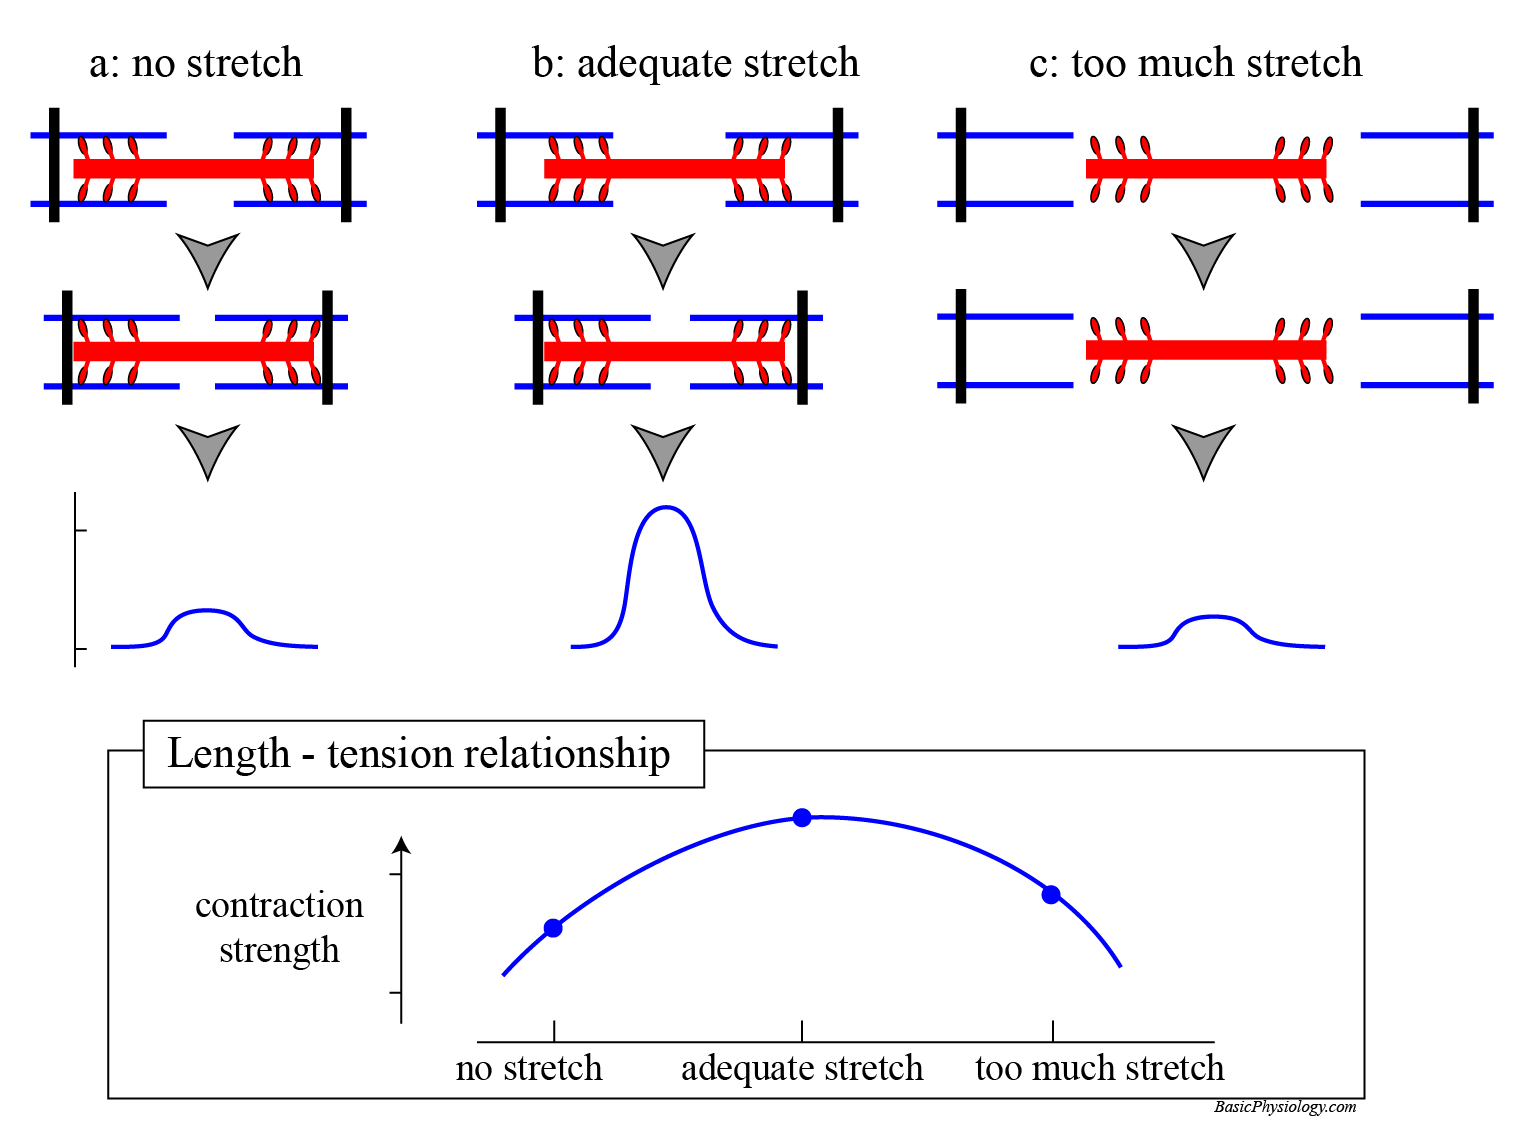 the influence of pre-stretch; LengthTensionDiagram